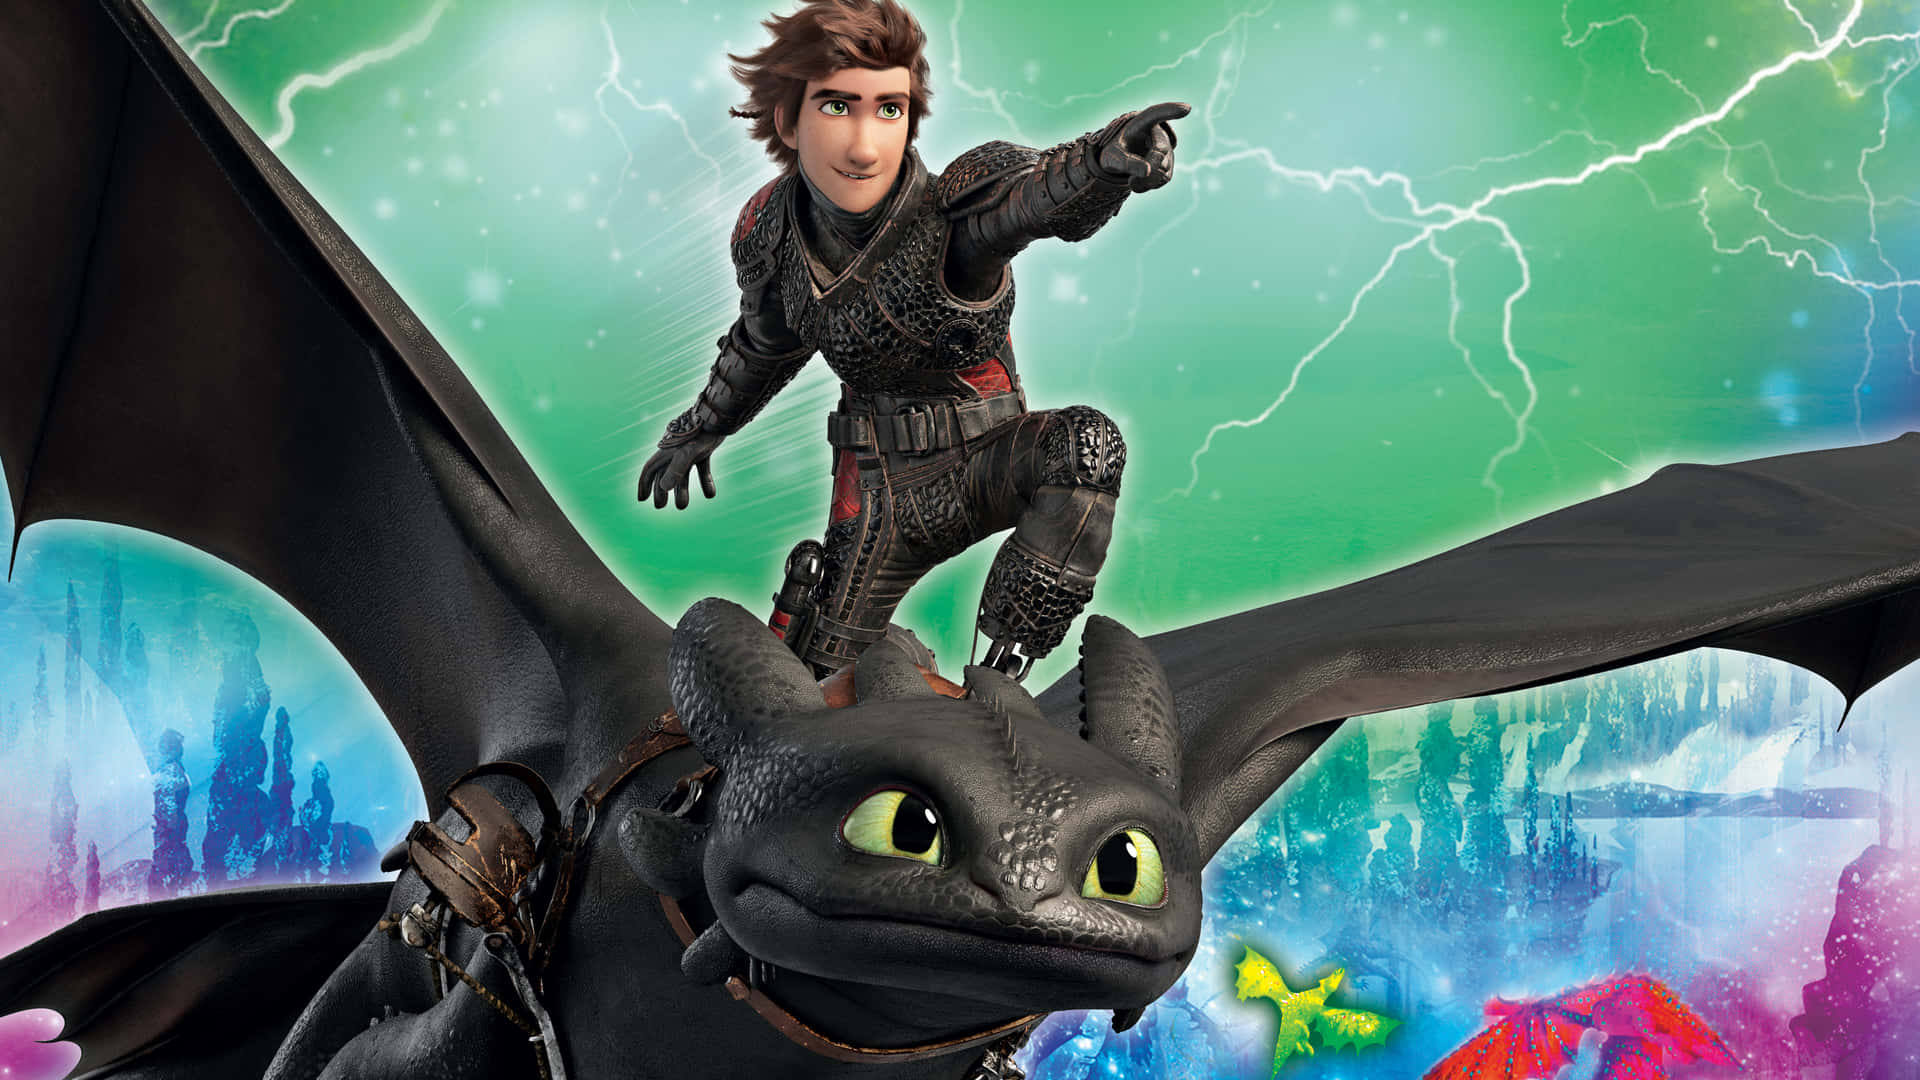 soar above the clouds with Hiccup and Toothless in "How To Train Your Dragon" Wallpaper